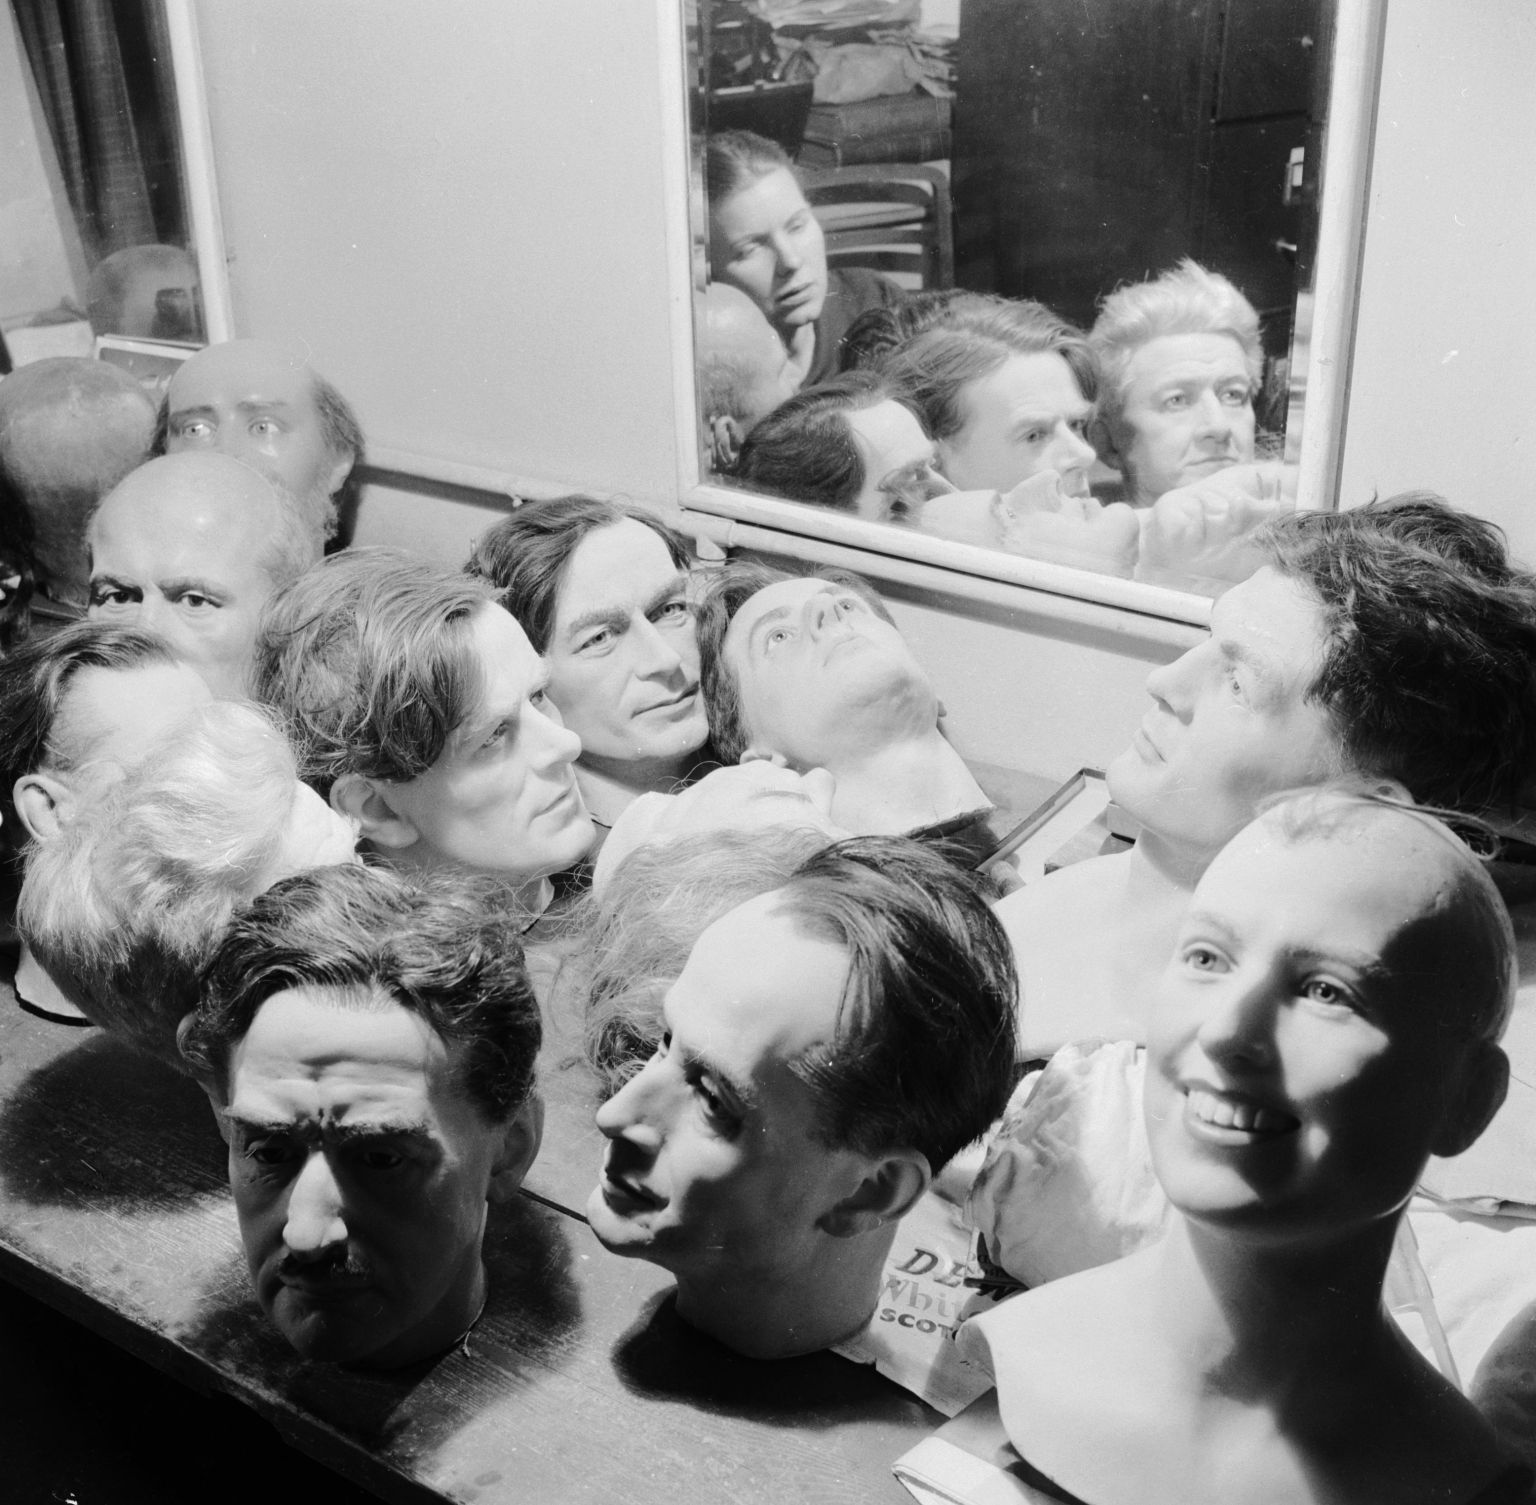 How Madame Tussaud built her house of wax